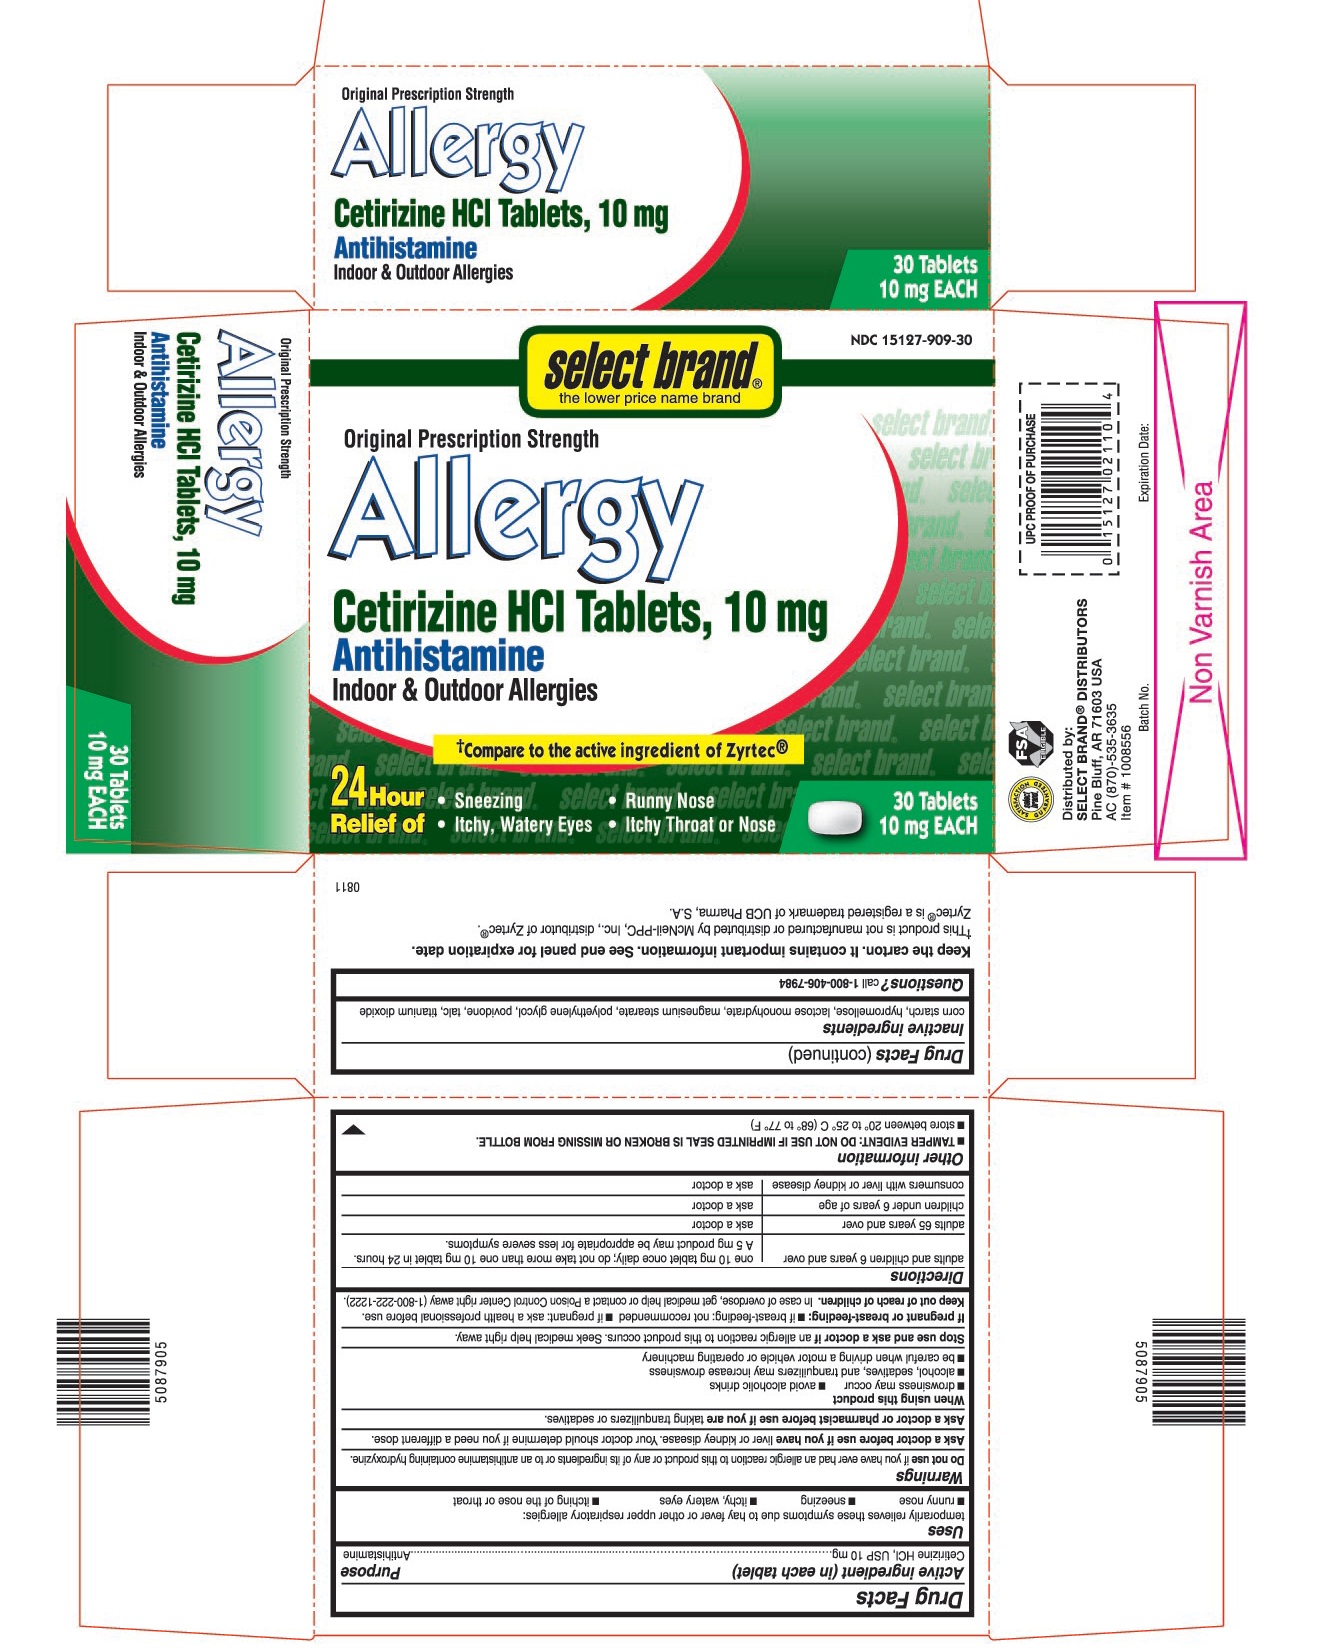 This is the 30 count bottle carton label for Select Brand Cetirizine HCl tablets, 10 mg.